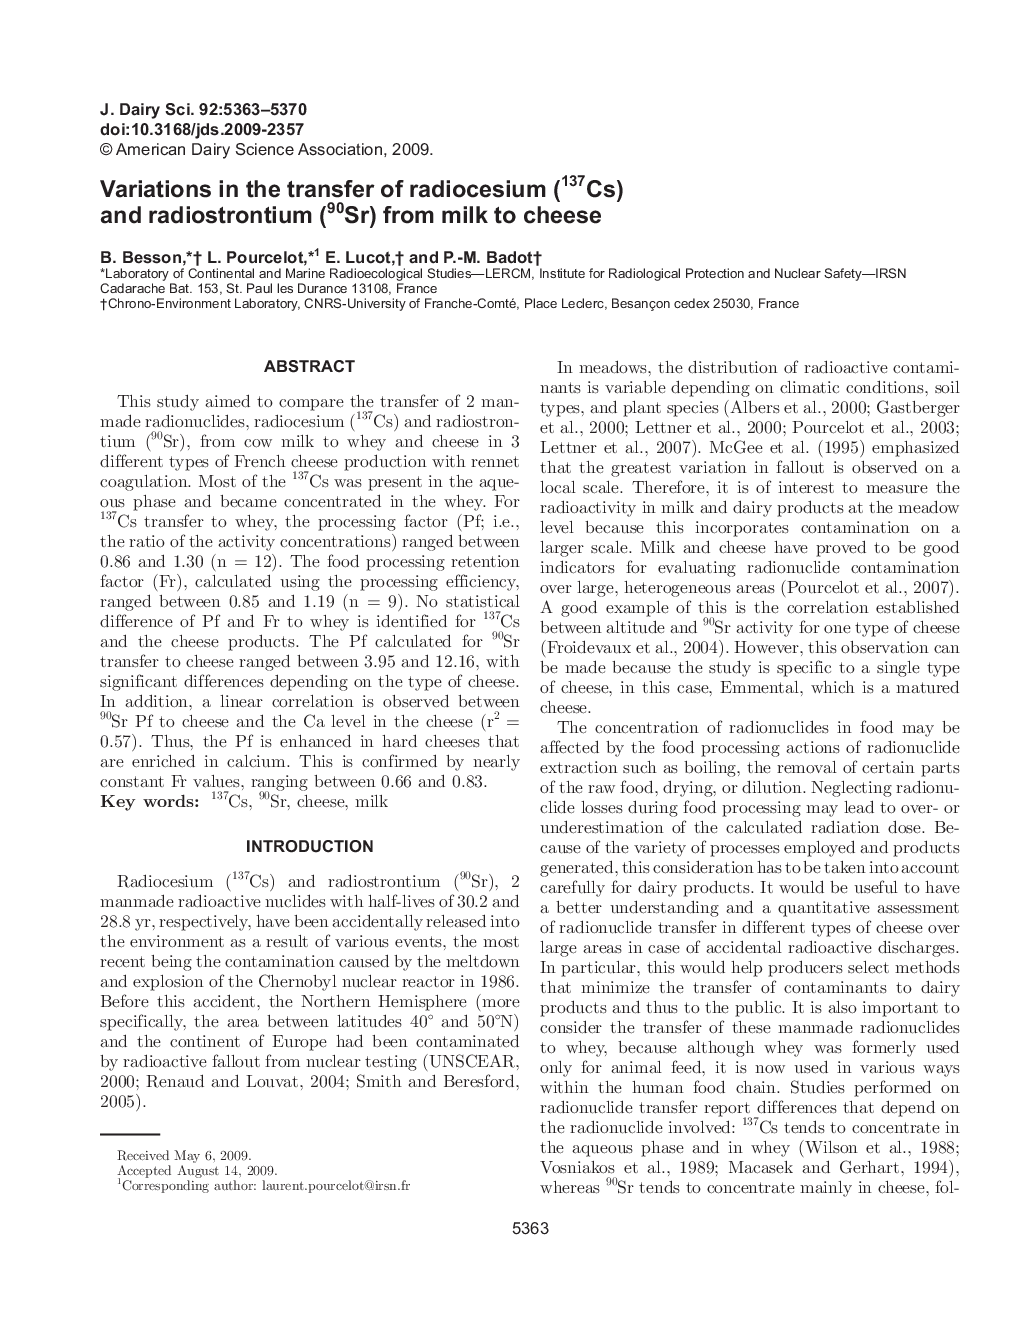 Variations in the transfer of radiocesium (137Cs) and radiostrontium (90Sr) from milk to cheese